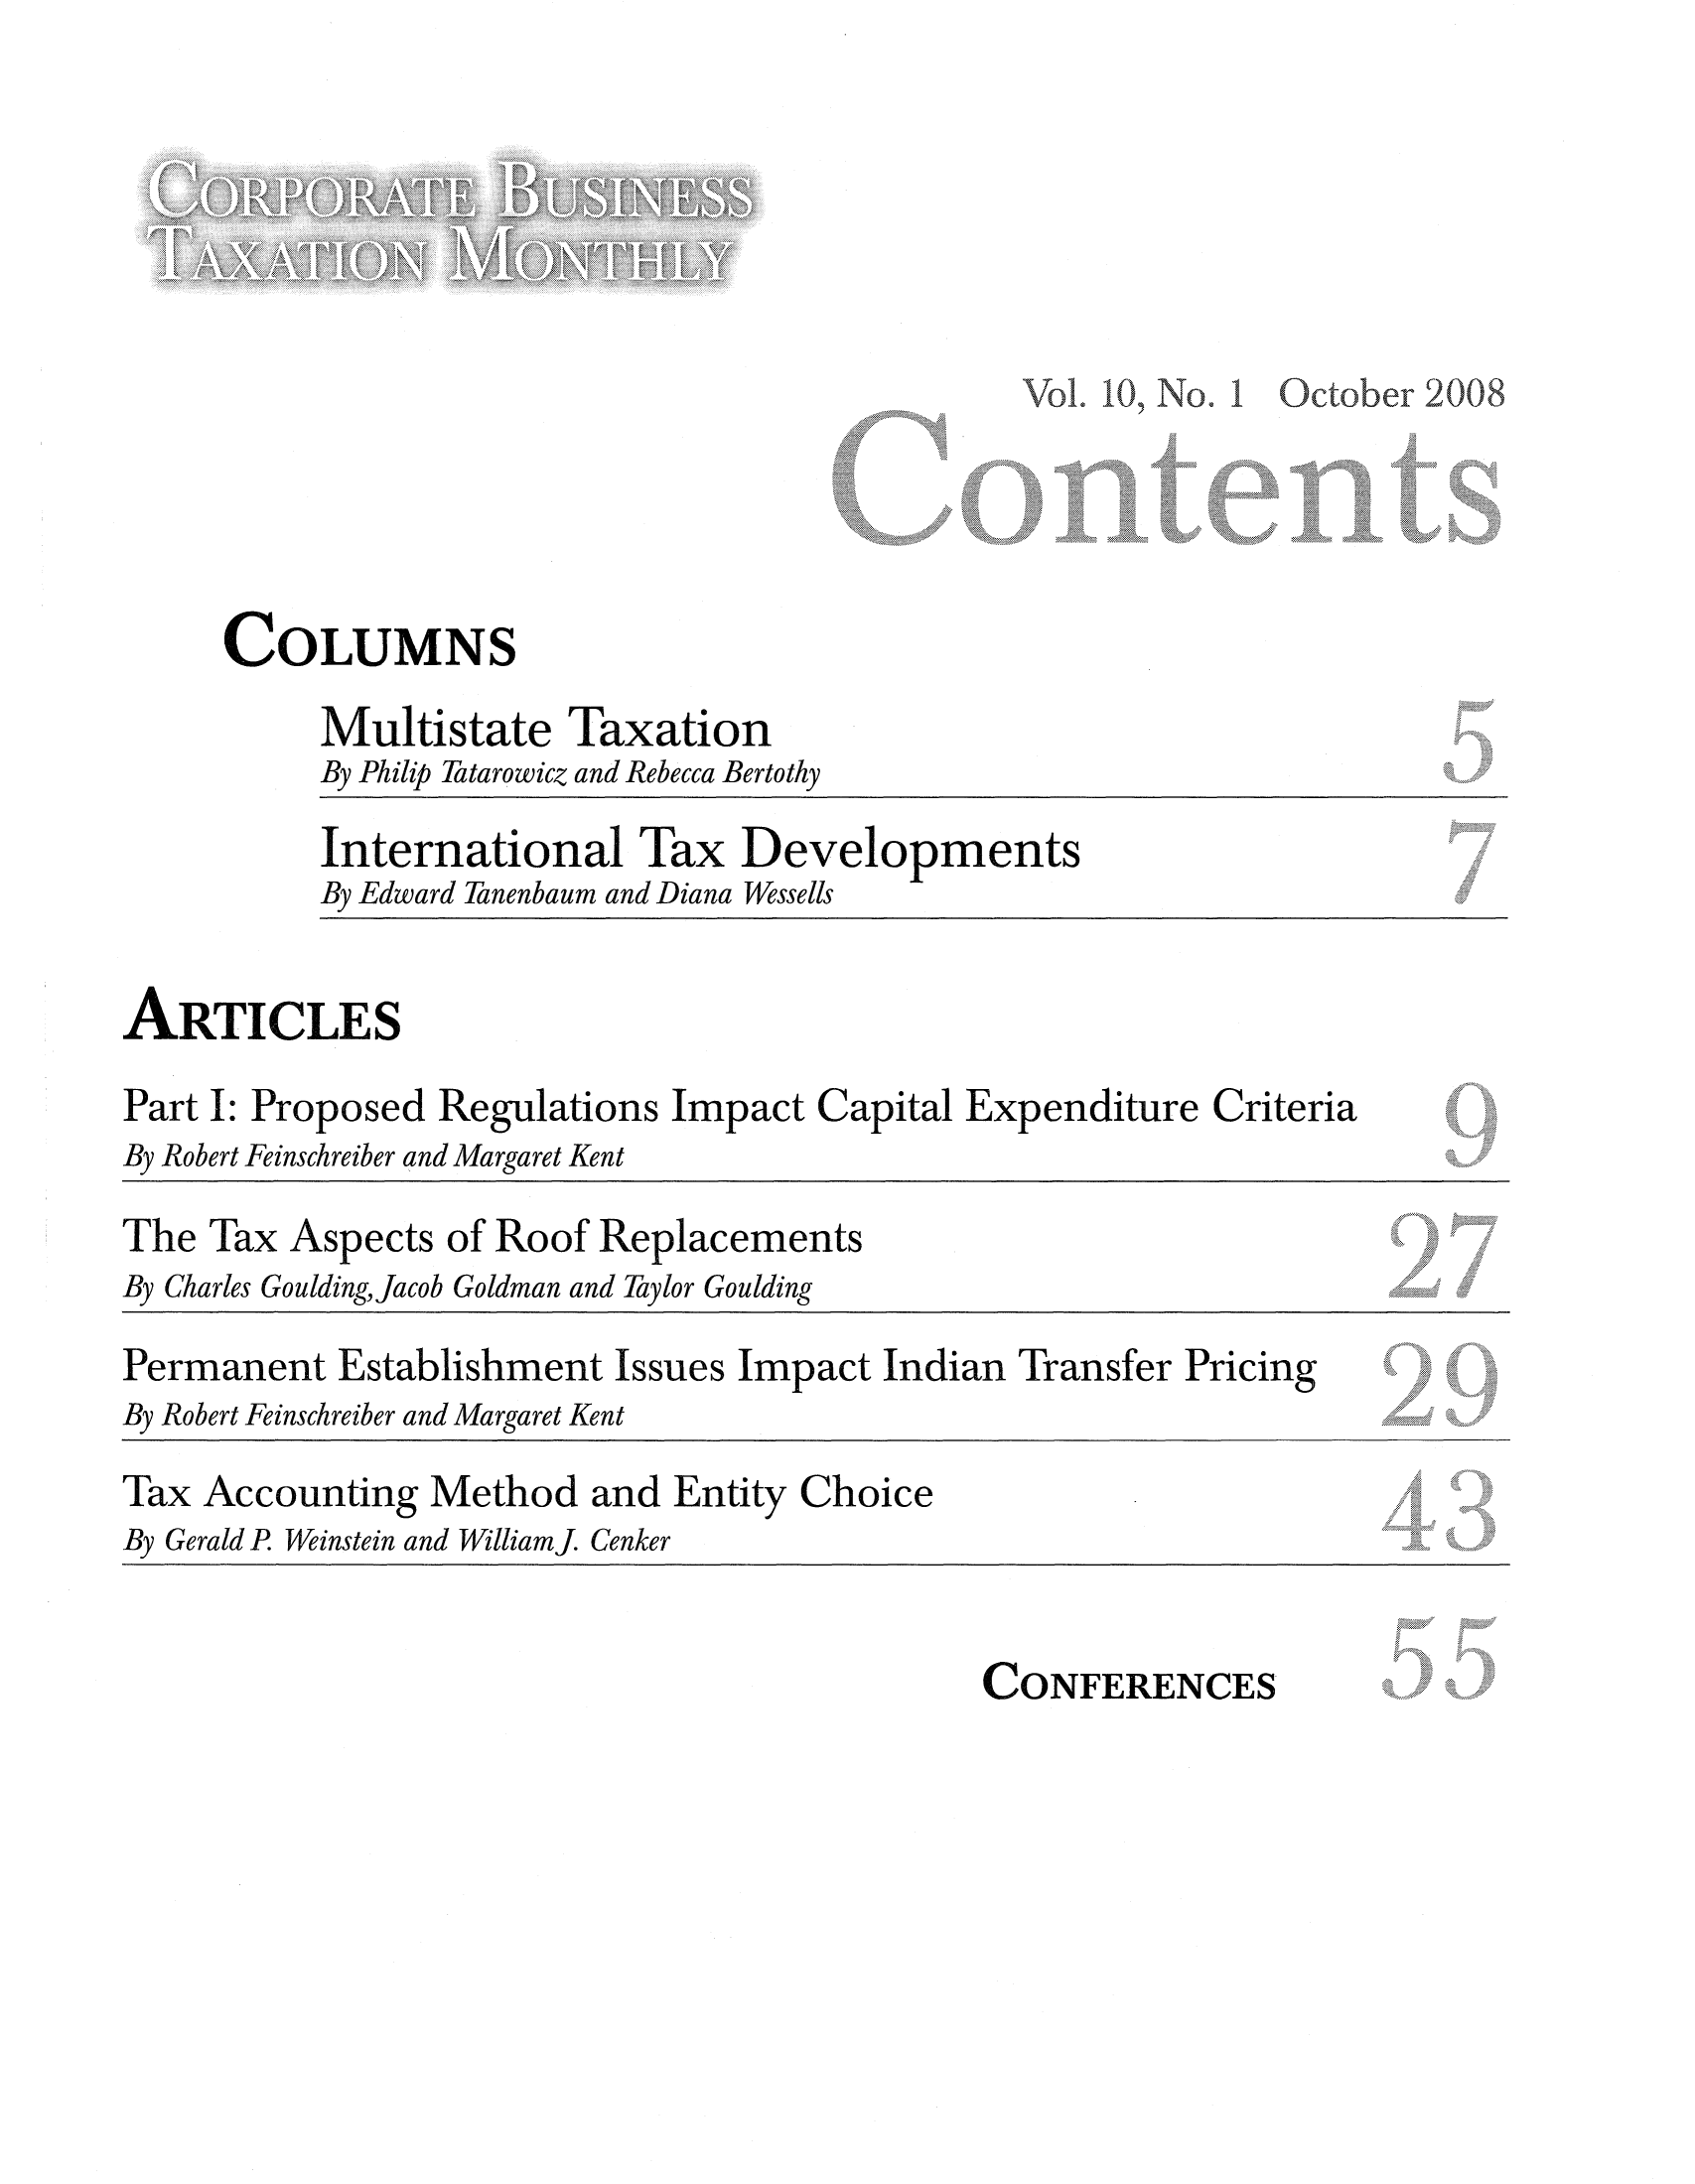 handle is hein.journals/corbus10 and id is 1 raw text is: A

Vol. 10, No. 1 October 2008
COLUMNS
Multistate Taxation
By Philip Tatarowicz and Rebecca Bertothy
International Tax Developments
By Edward Tanenbaum and Diana Wessells
ARTICLES
Part I: Proposed Regulations Impact Capital Expenditure Criteria
By Robert Feinschreiber and Margaret Kent
The Tax Aspects of Roof Replacements
By Charles GouldingJacob Goldman and Taylor Goulding
Permanent Establishment Issues Impact Indian Transfer Pricing
By Robert Feinschreiber and Margaret Kent
Tax Accounting Method and Entity Choice
By Gerald P Weinstein and Williamj Cenker

CONFERENCES


